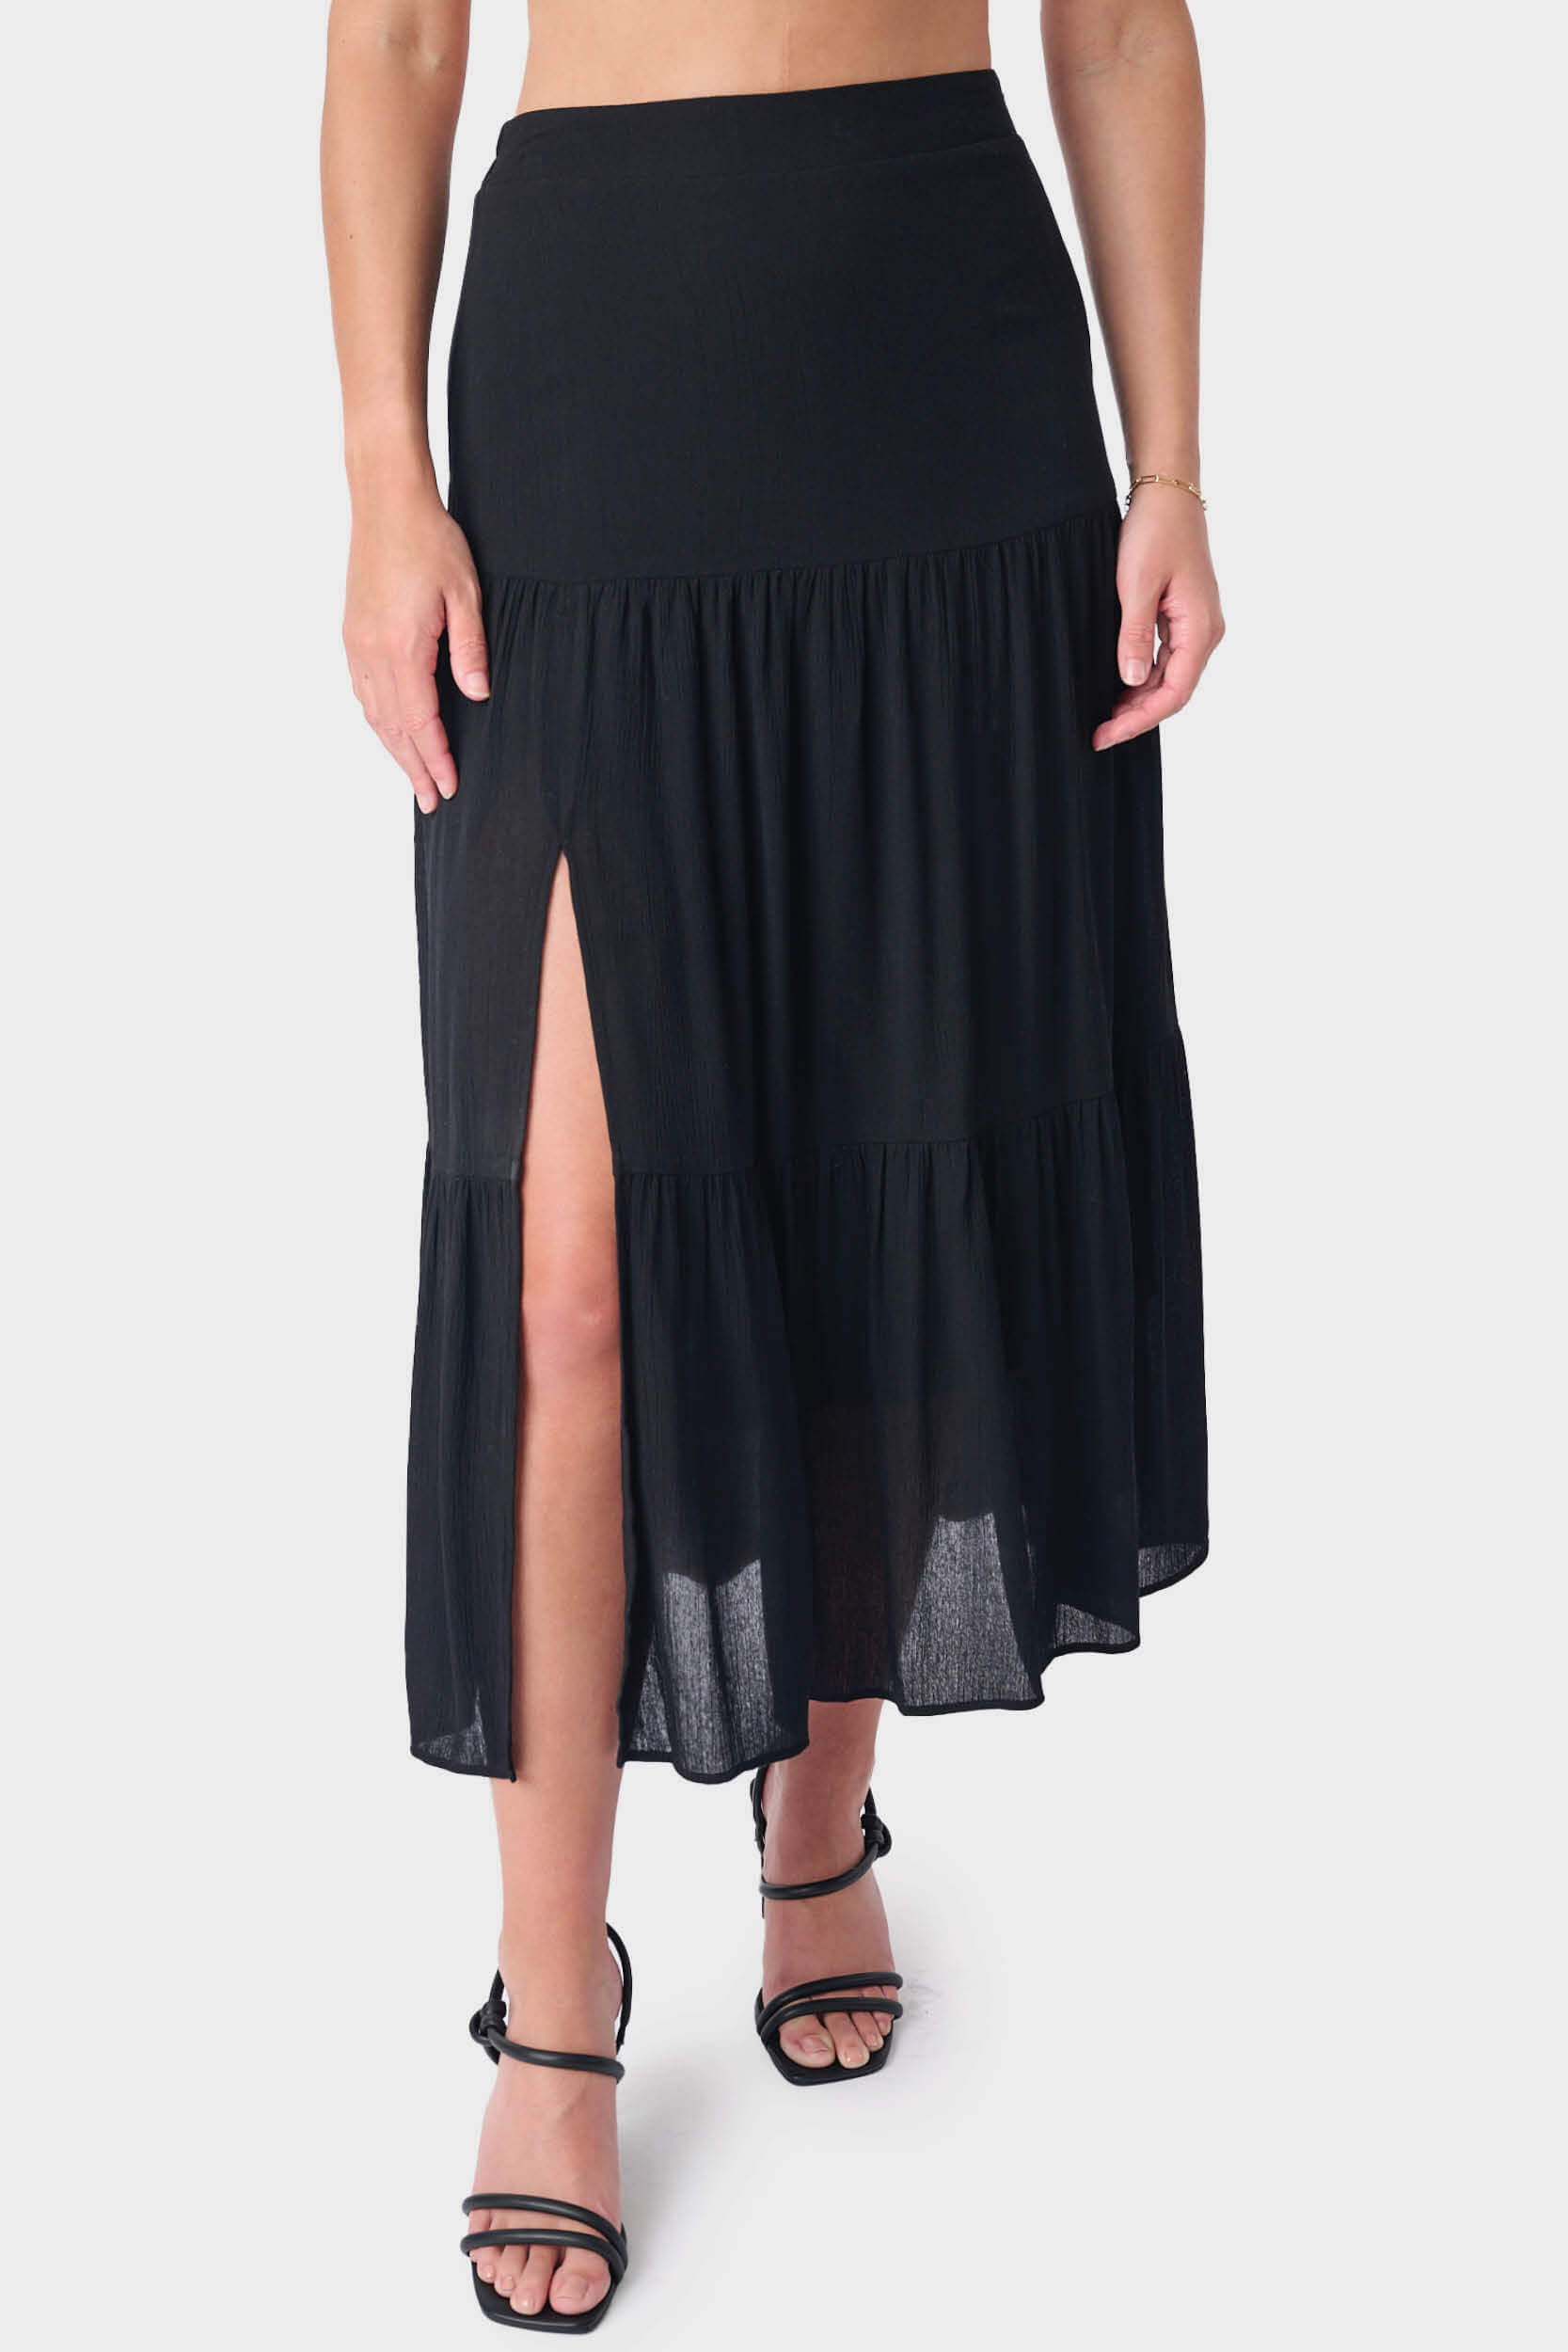 Tiered Maxi Skirt With Offset Front Slit - Black S